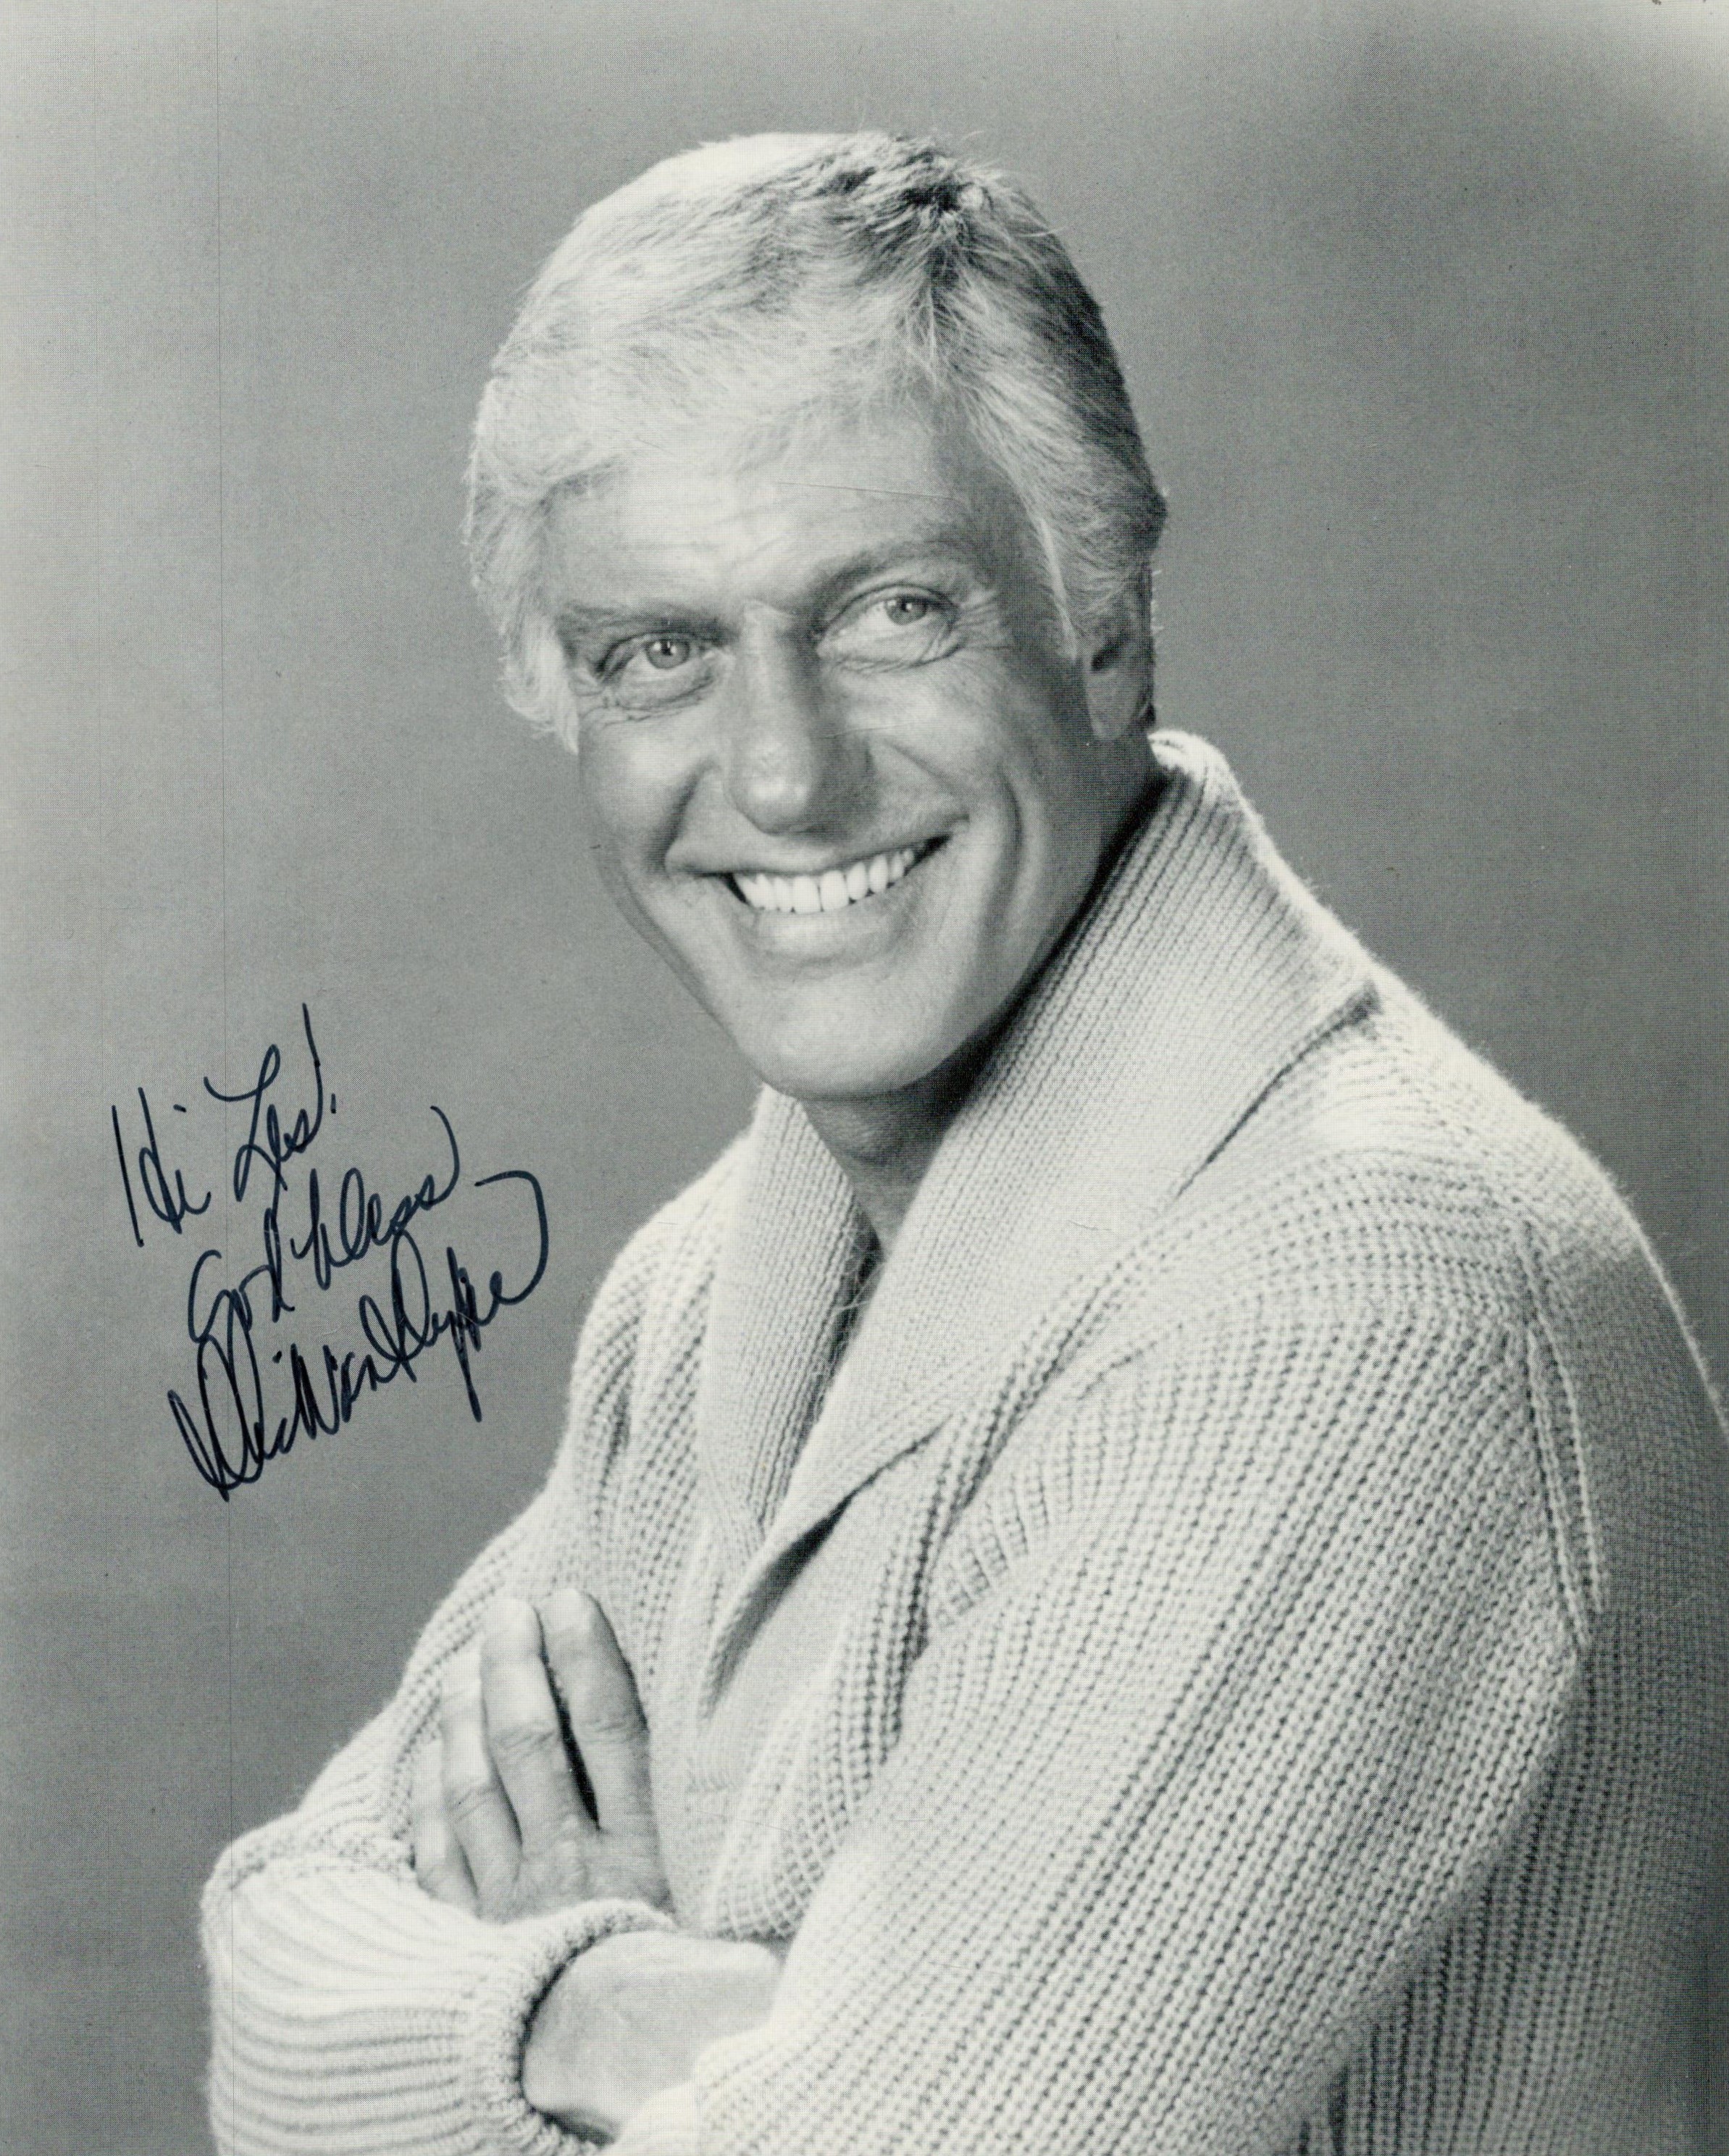 Dick Van Dyke signed 10x8 inch black and white photo. Dedicated. Good Condition. All autographs come